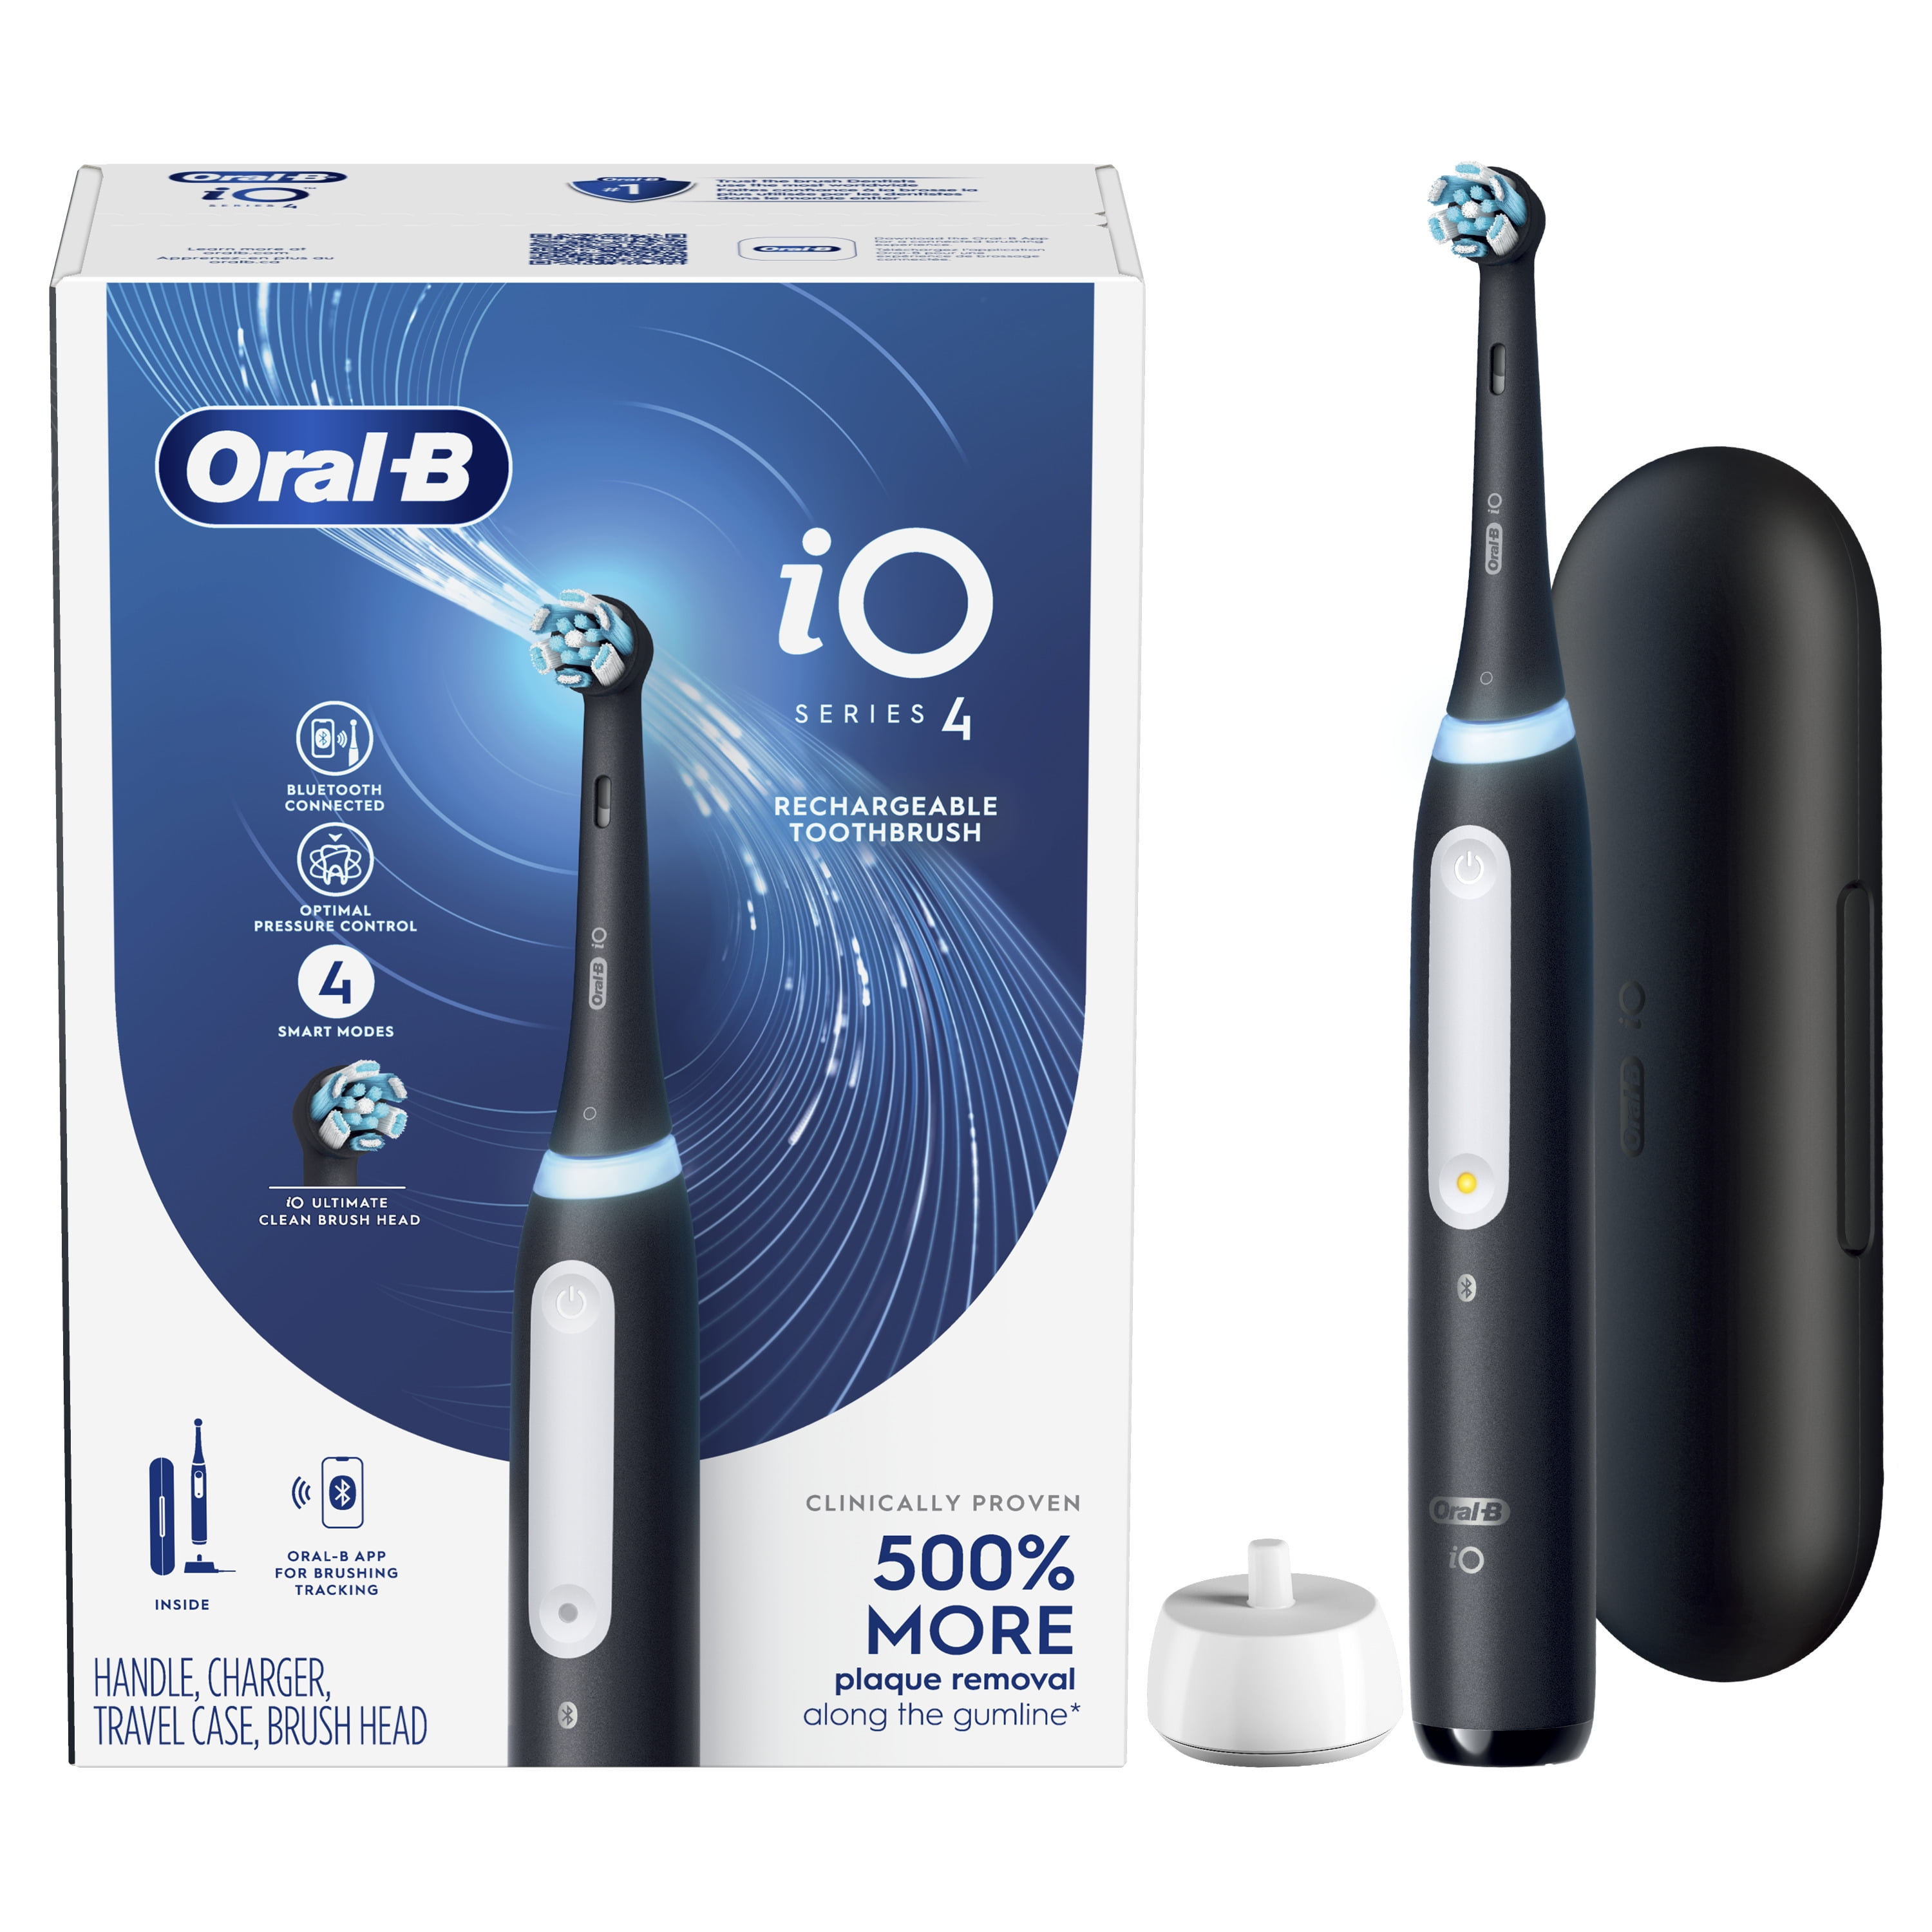 Black Rechargeable, with iO Head, Toothbrush 4 Brush Oral-B (1) Series Electric